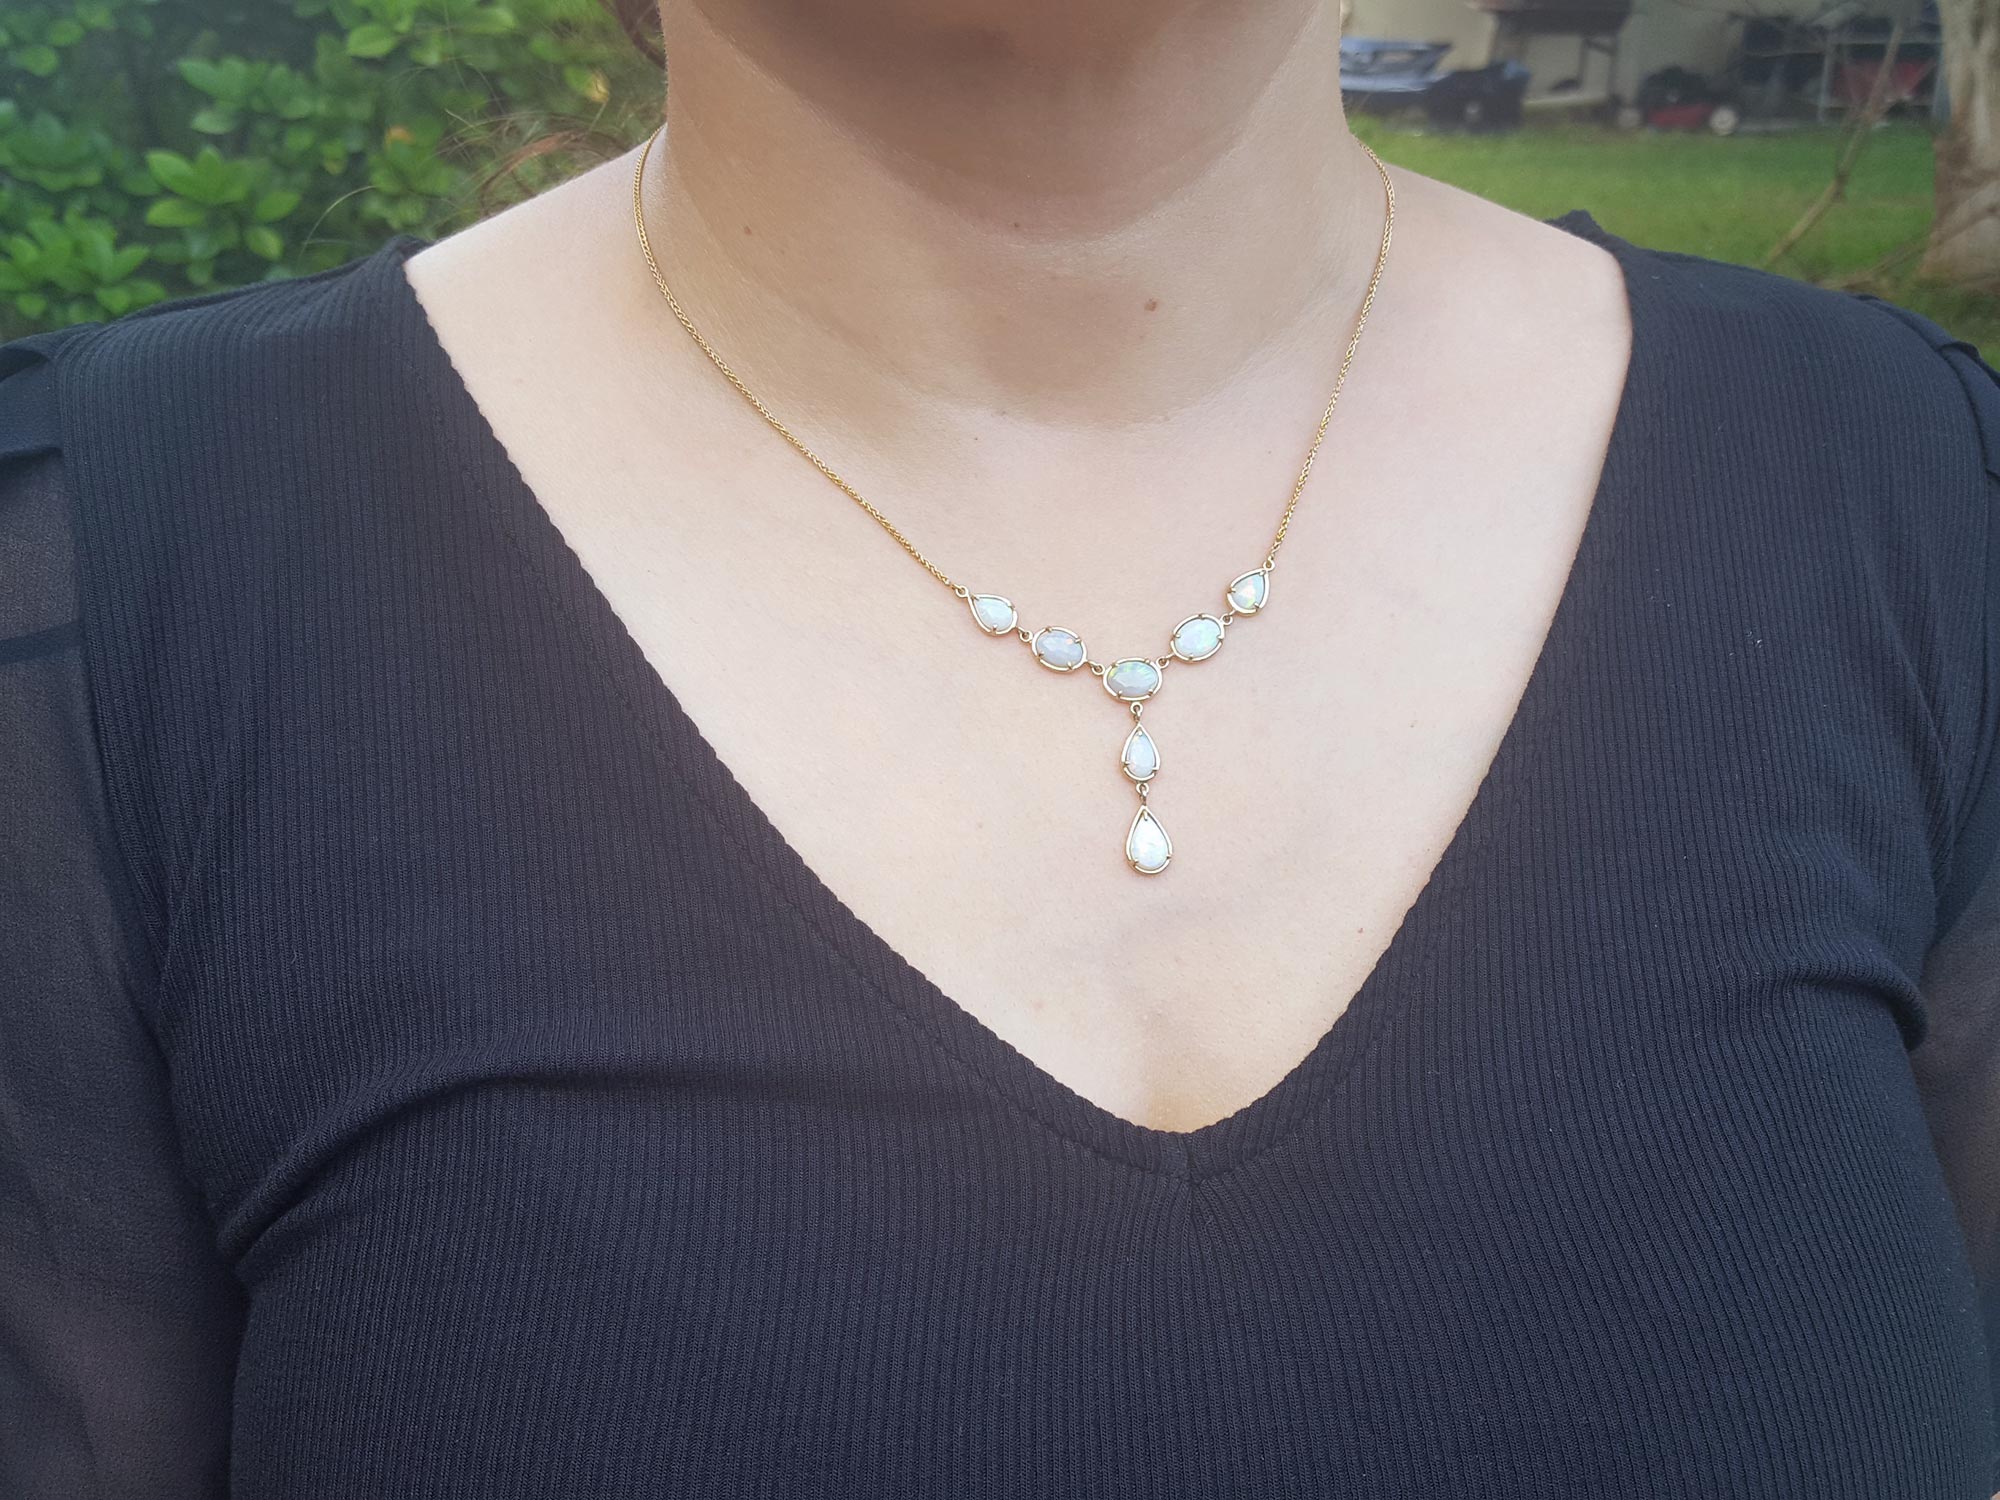 3.94 ct Solid Australian opal necklace 14K Yellow Gold